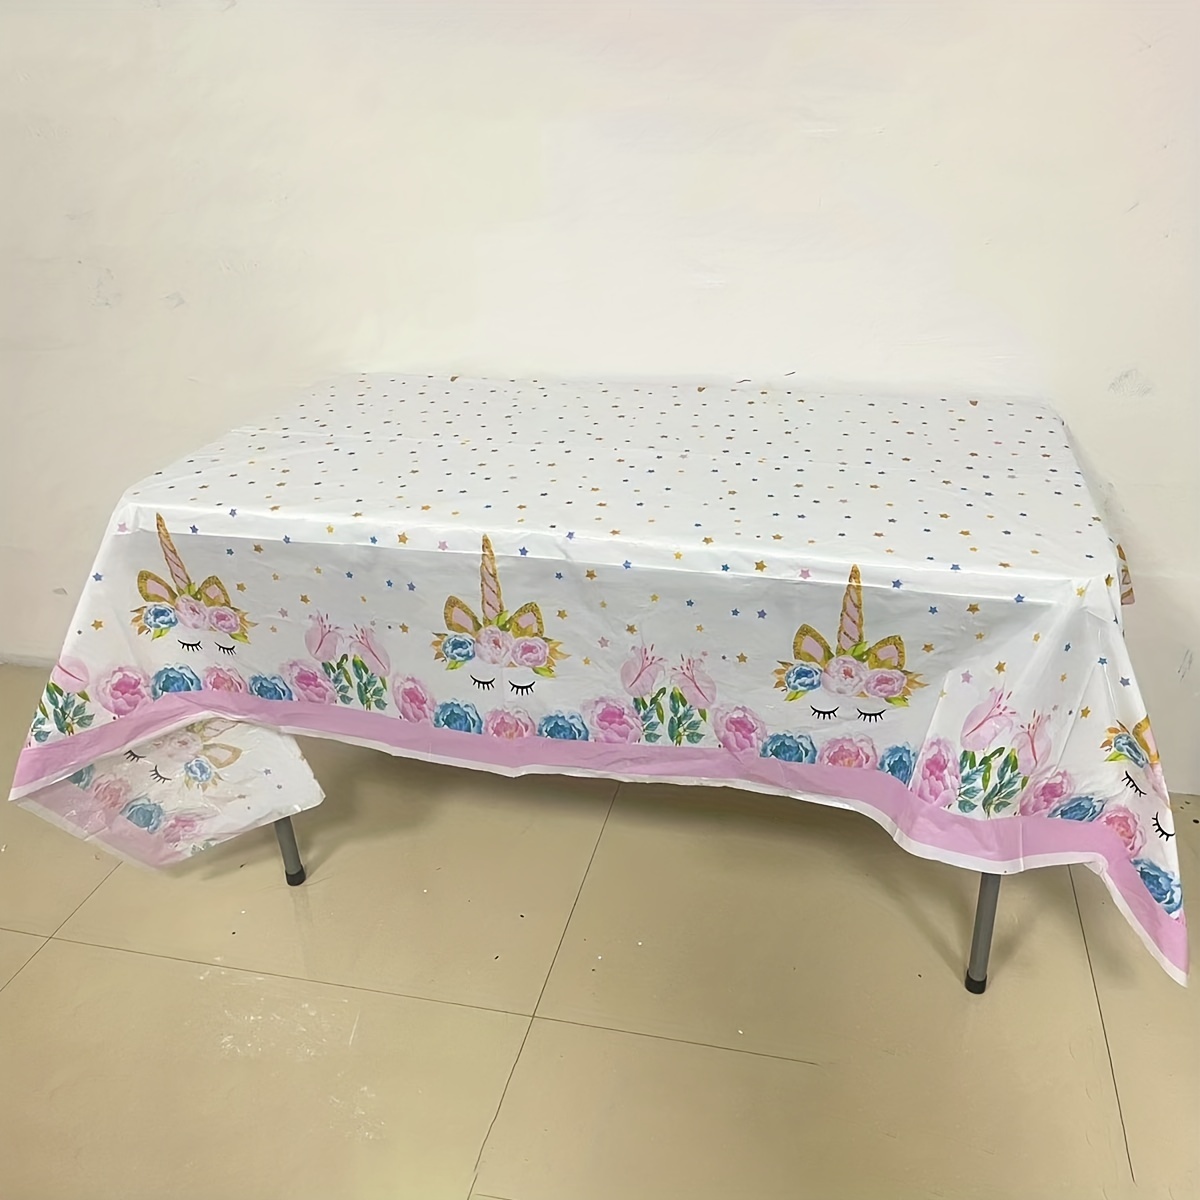 

1pc, Rainbow Cute Theme Party Gathering Tablecloth, Unicorn, Flower, Star, Black Eyebrow Pattern Disposable Tablecloth, Meal Cloth, Birthday Tablecloth, Party Decorations, Tablecloth Size 130*220cm